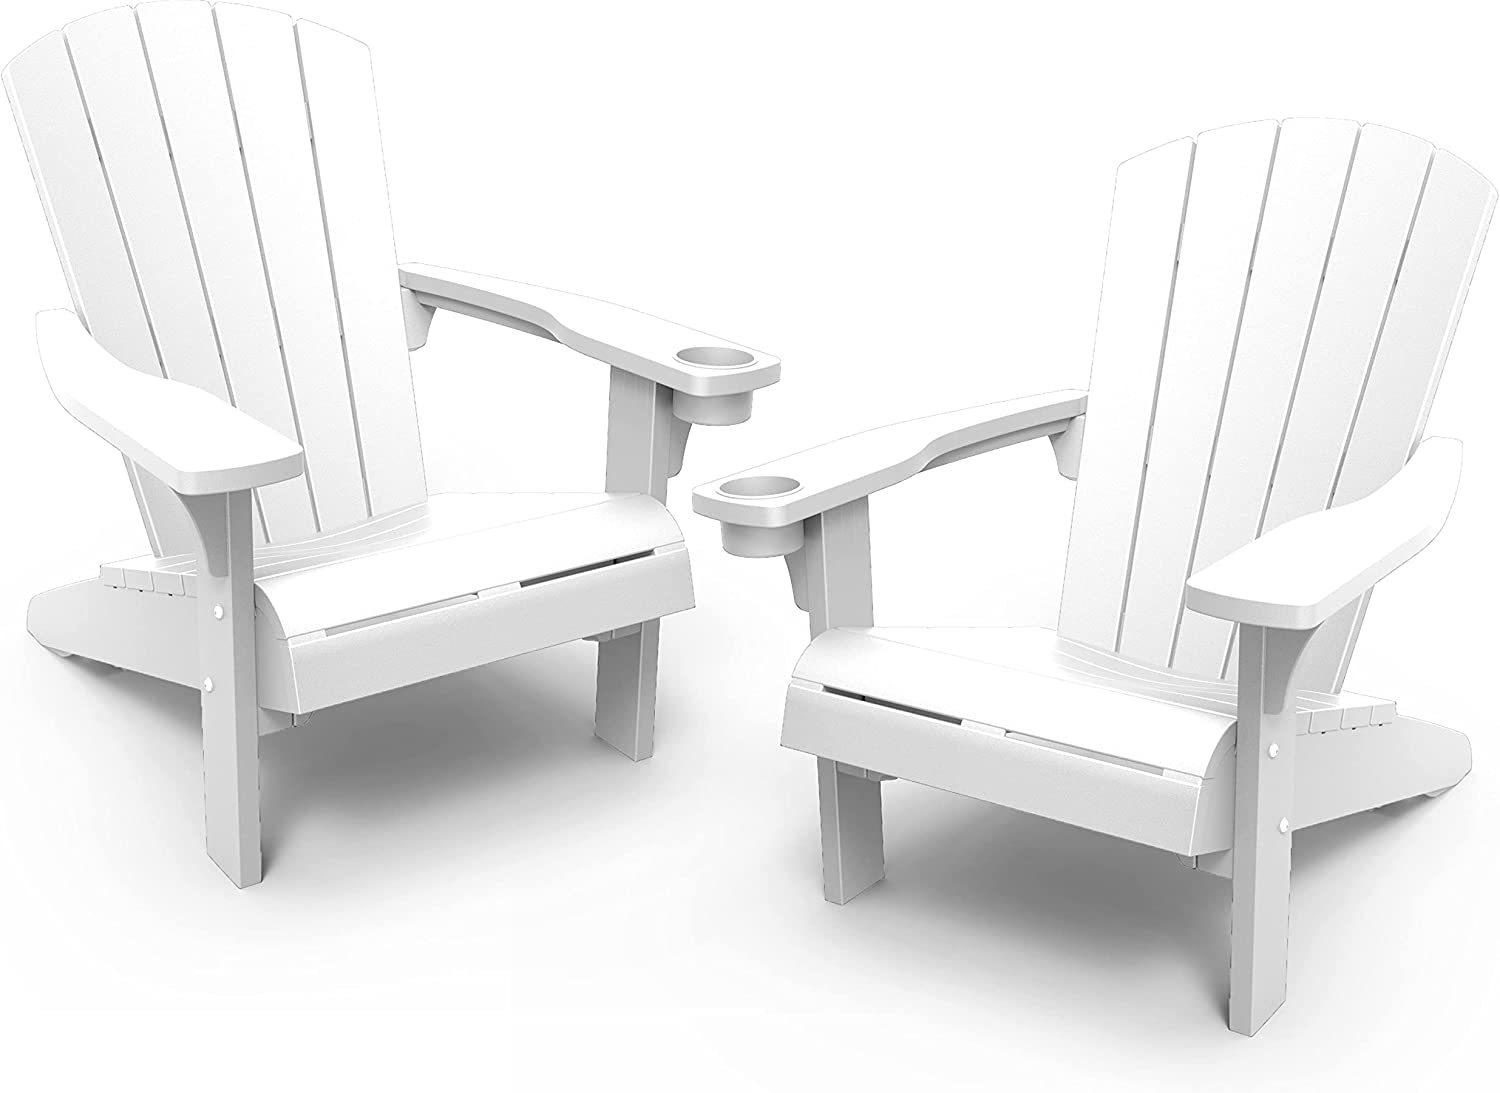 Keter 2 Pack Alpine Adirondack Resin Outdoor Furniture Patio Chairs with Cup - $320.99